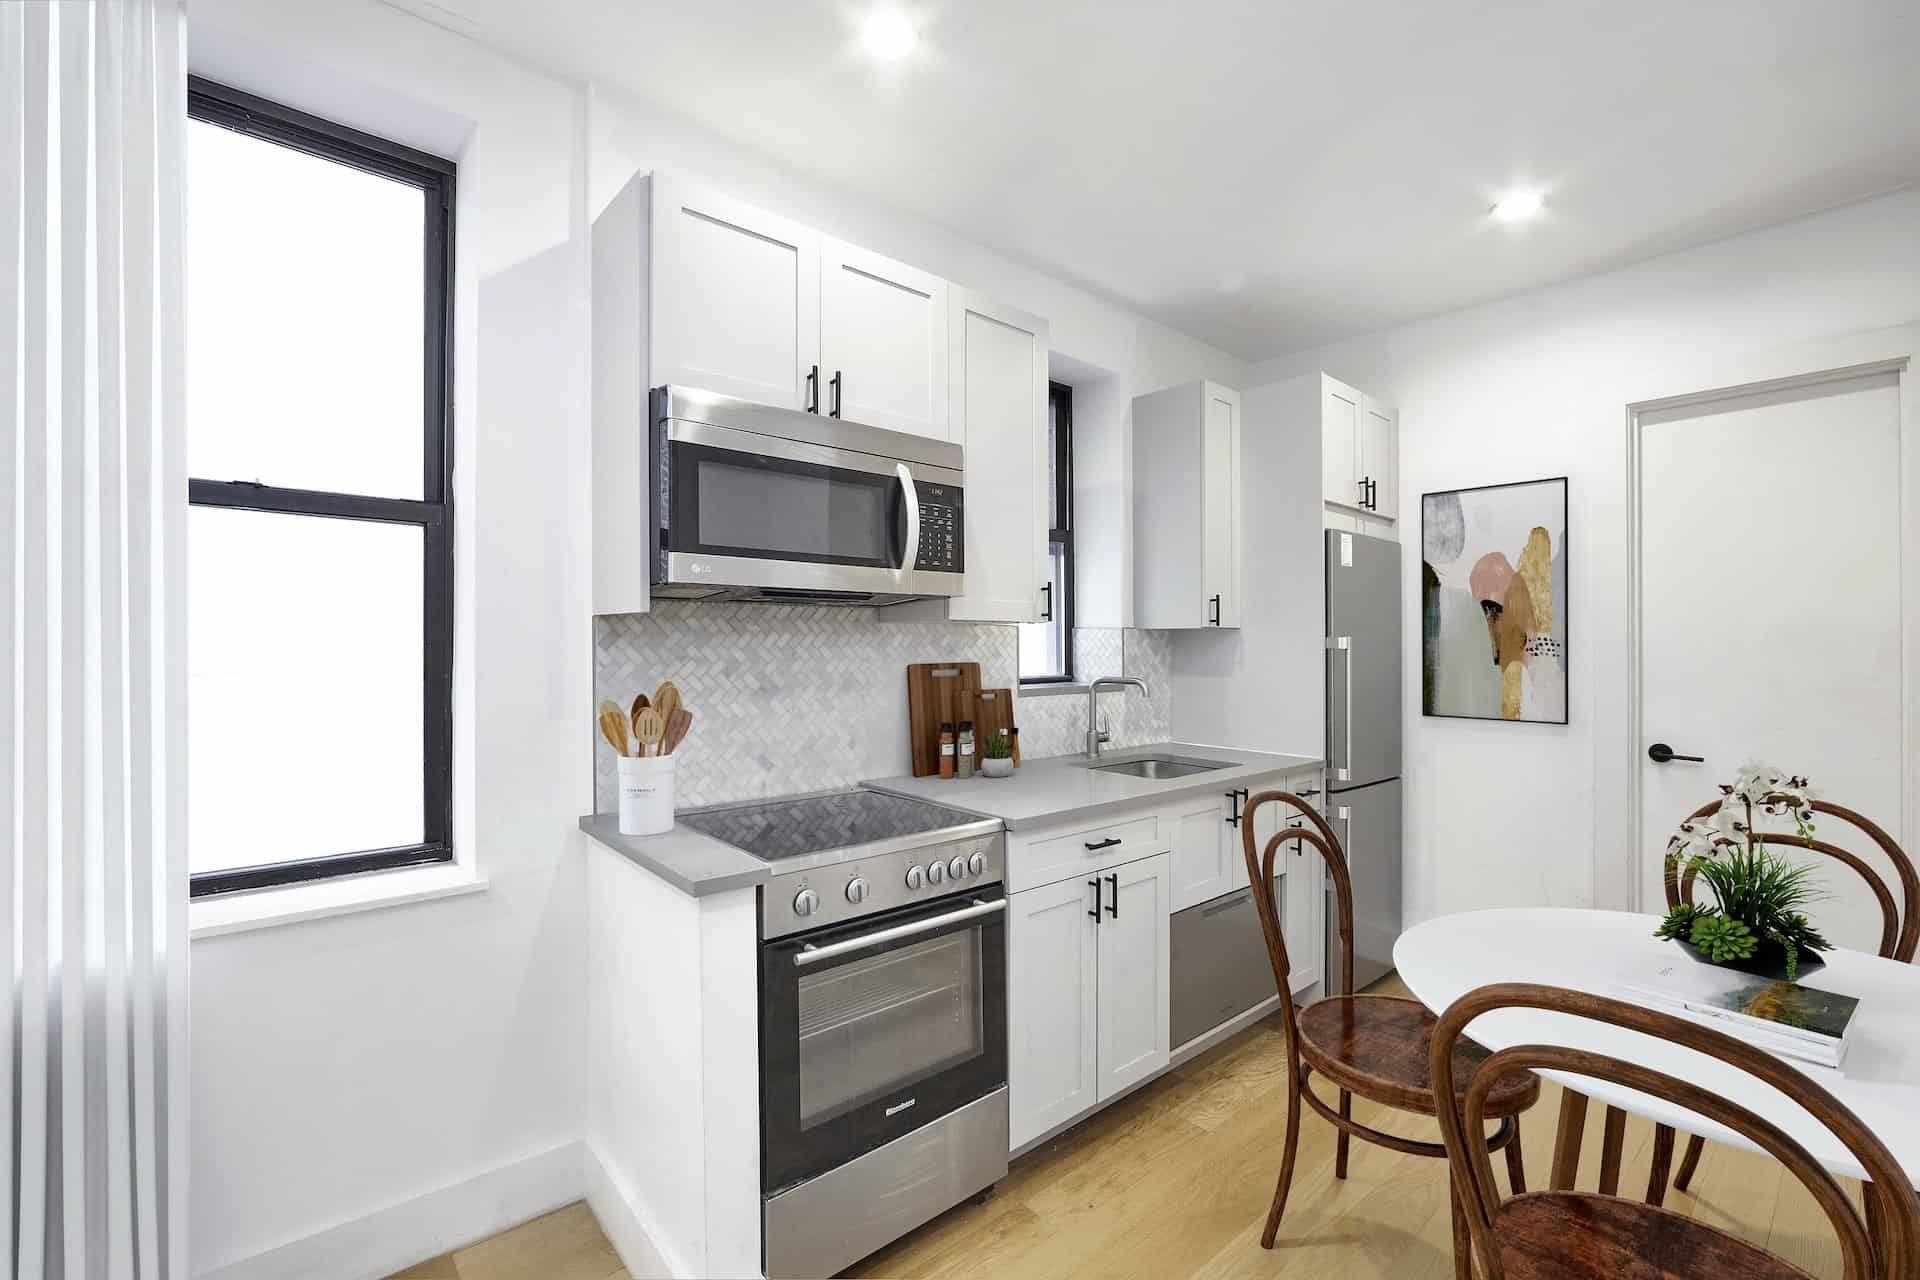 Kitchen at 244 East 46th Street apartments with stainless steel appliances, stone countertops, a window and hardwood floors.